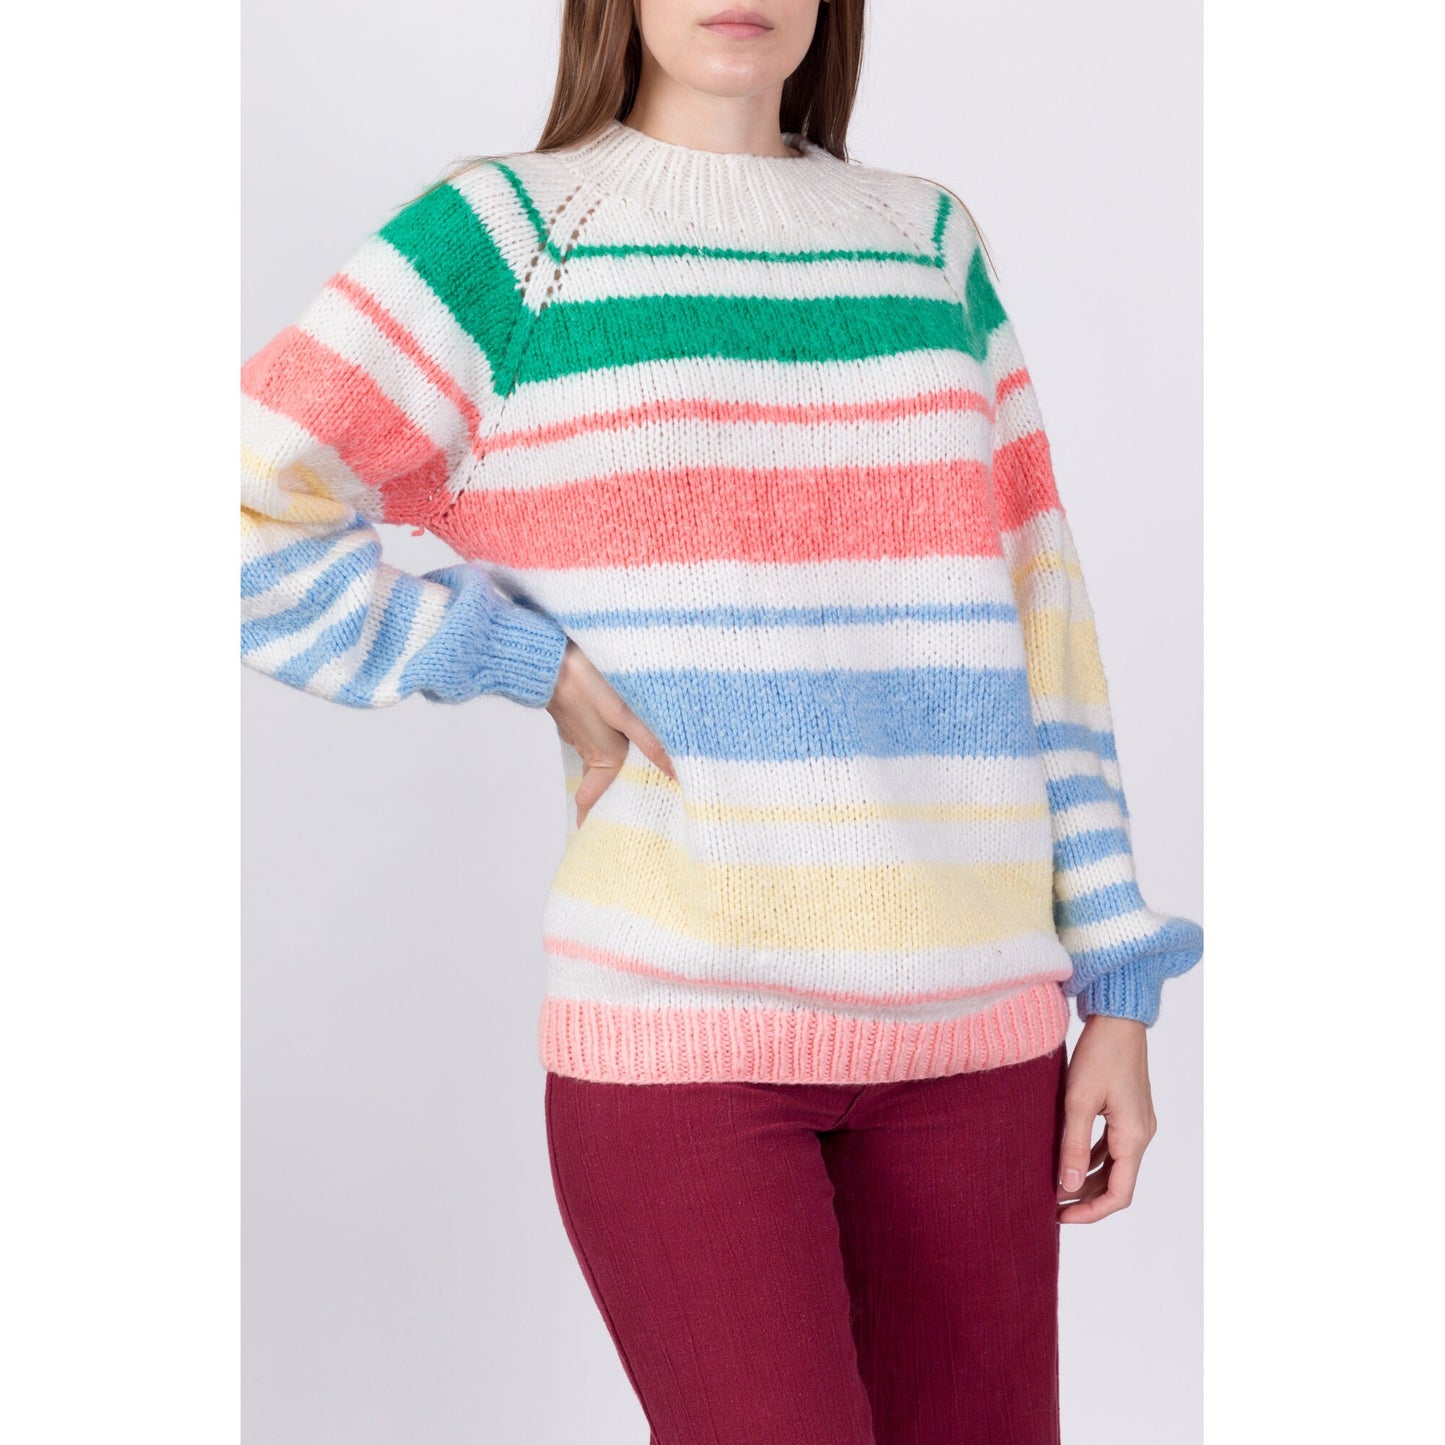 Retro 80s Gradient Striped Knit Sweater - Large 